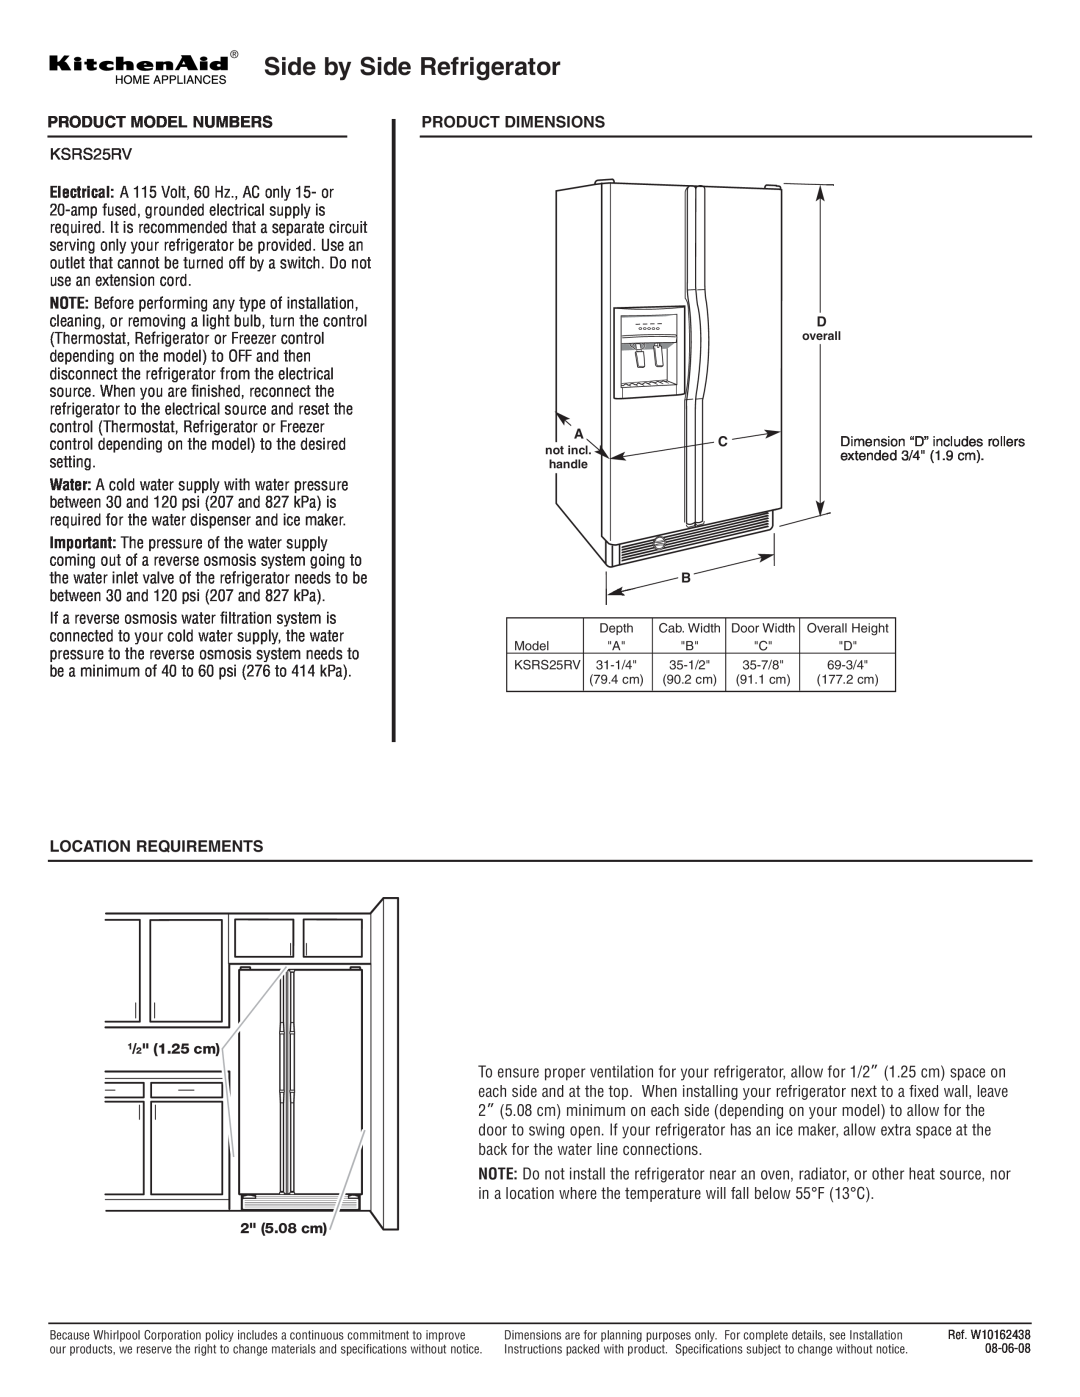 KitchenAid KSRS25RV dimensions Side by Side Refrigerator, Product Model Numbers, Product Dimensions, Location Requirements 